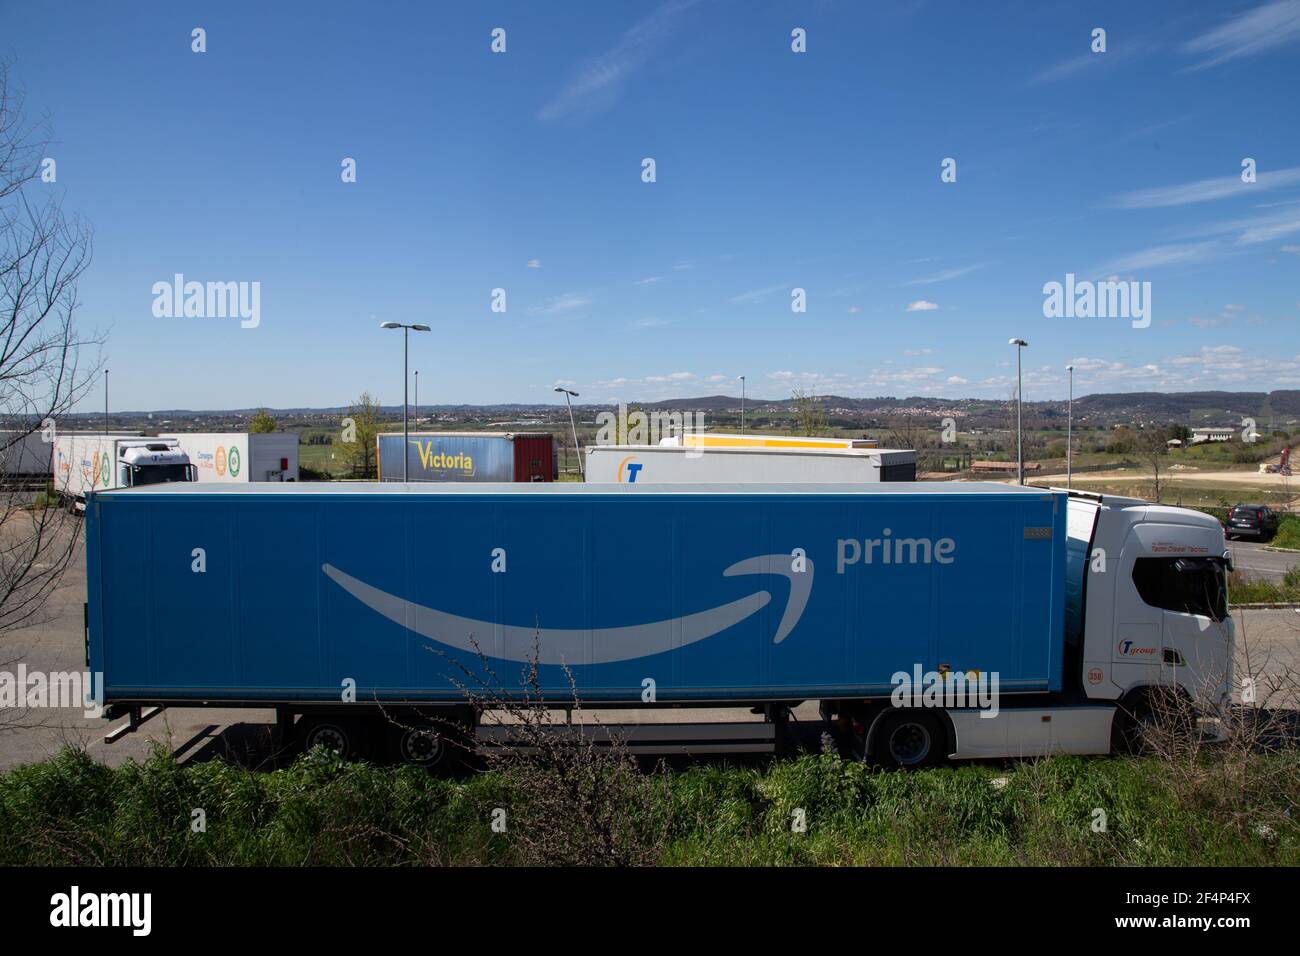 Roma, Italy. 22nd Mar, 2021. (3/22/2021) View of an Amazon Prime shipping  truck near